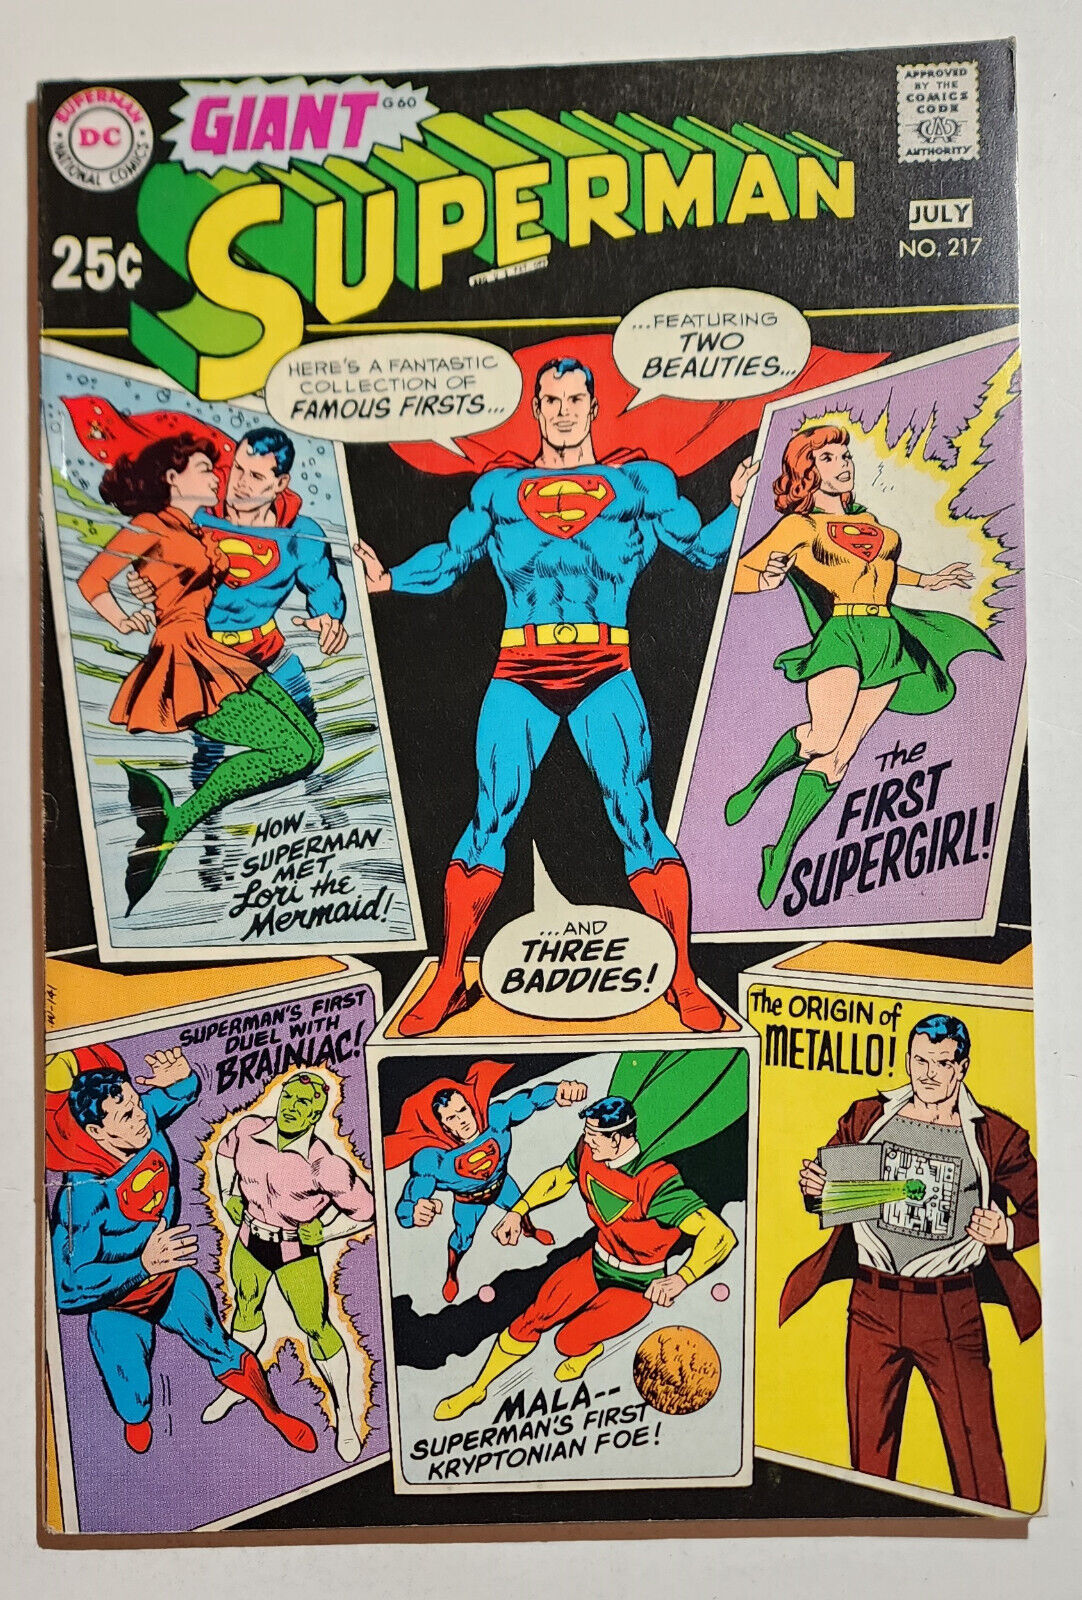 SUPERMAN #217 GIANT G60 1969 , I combine shipping